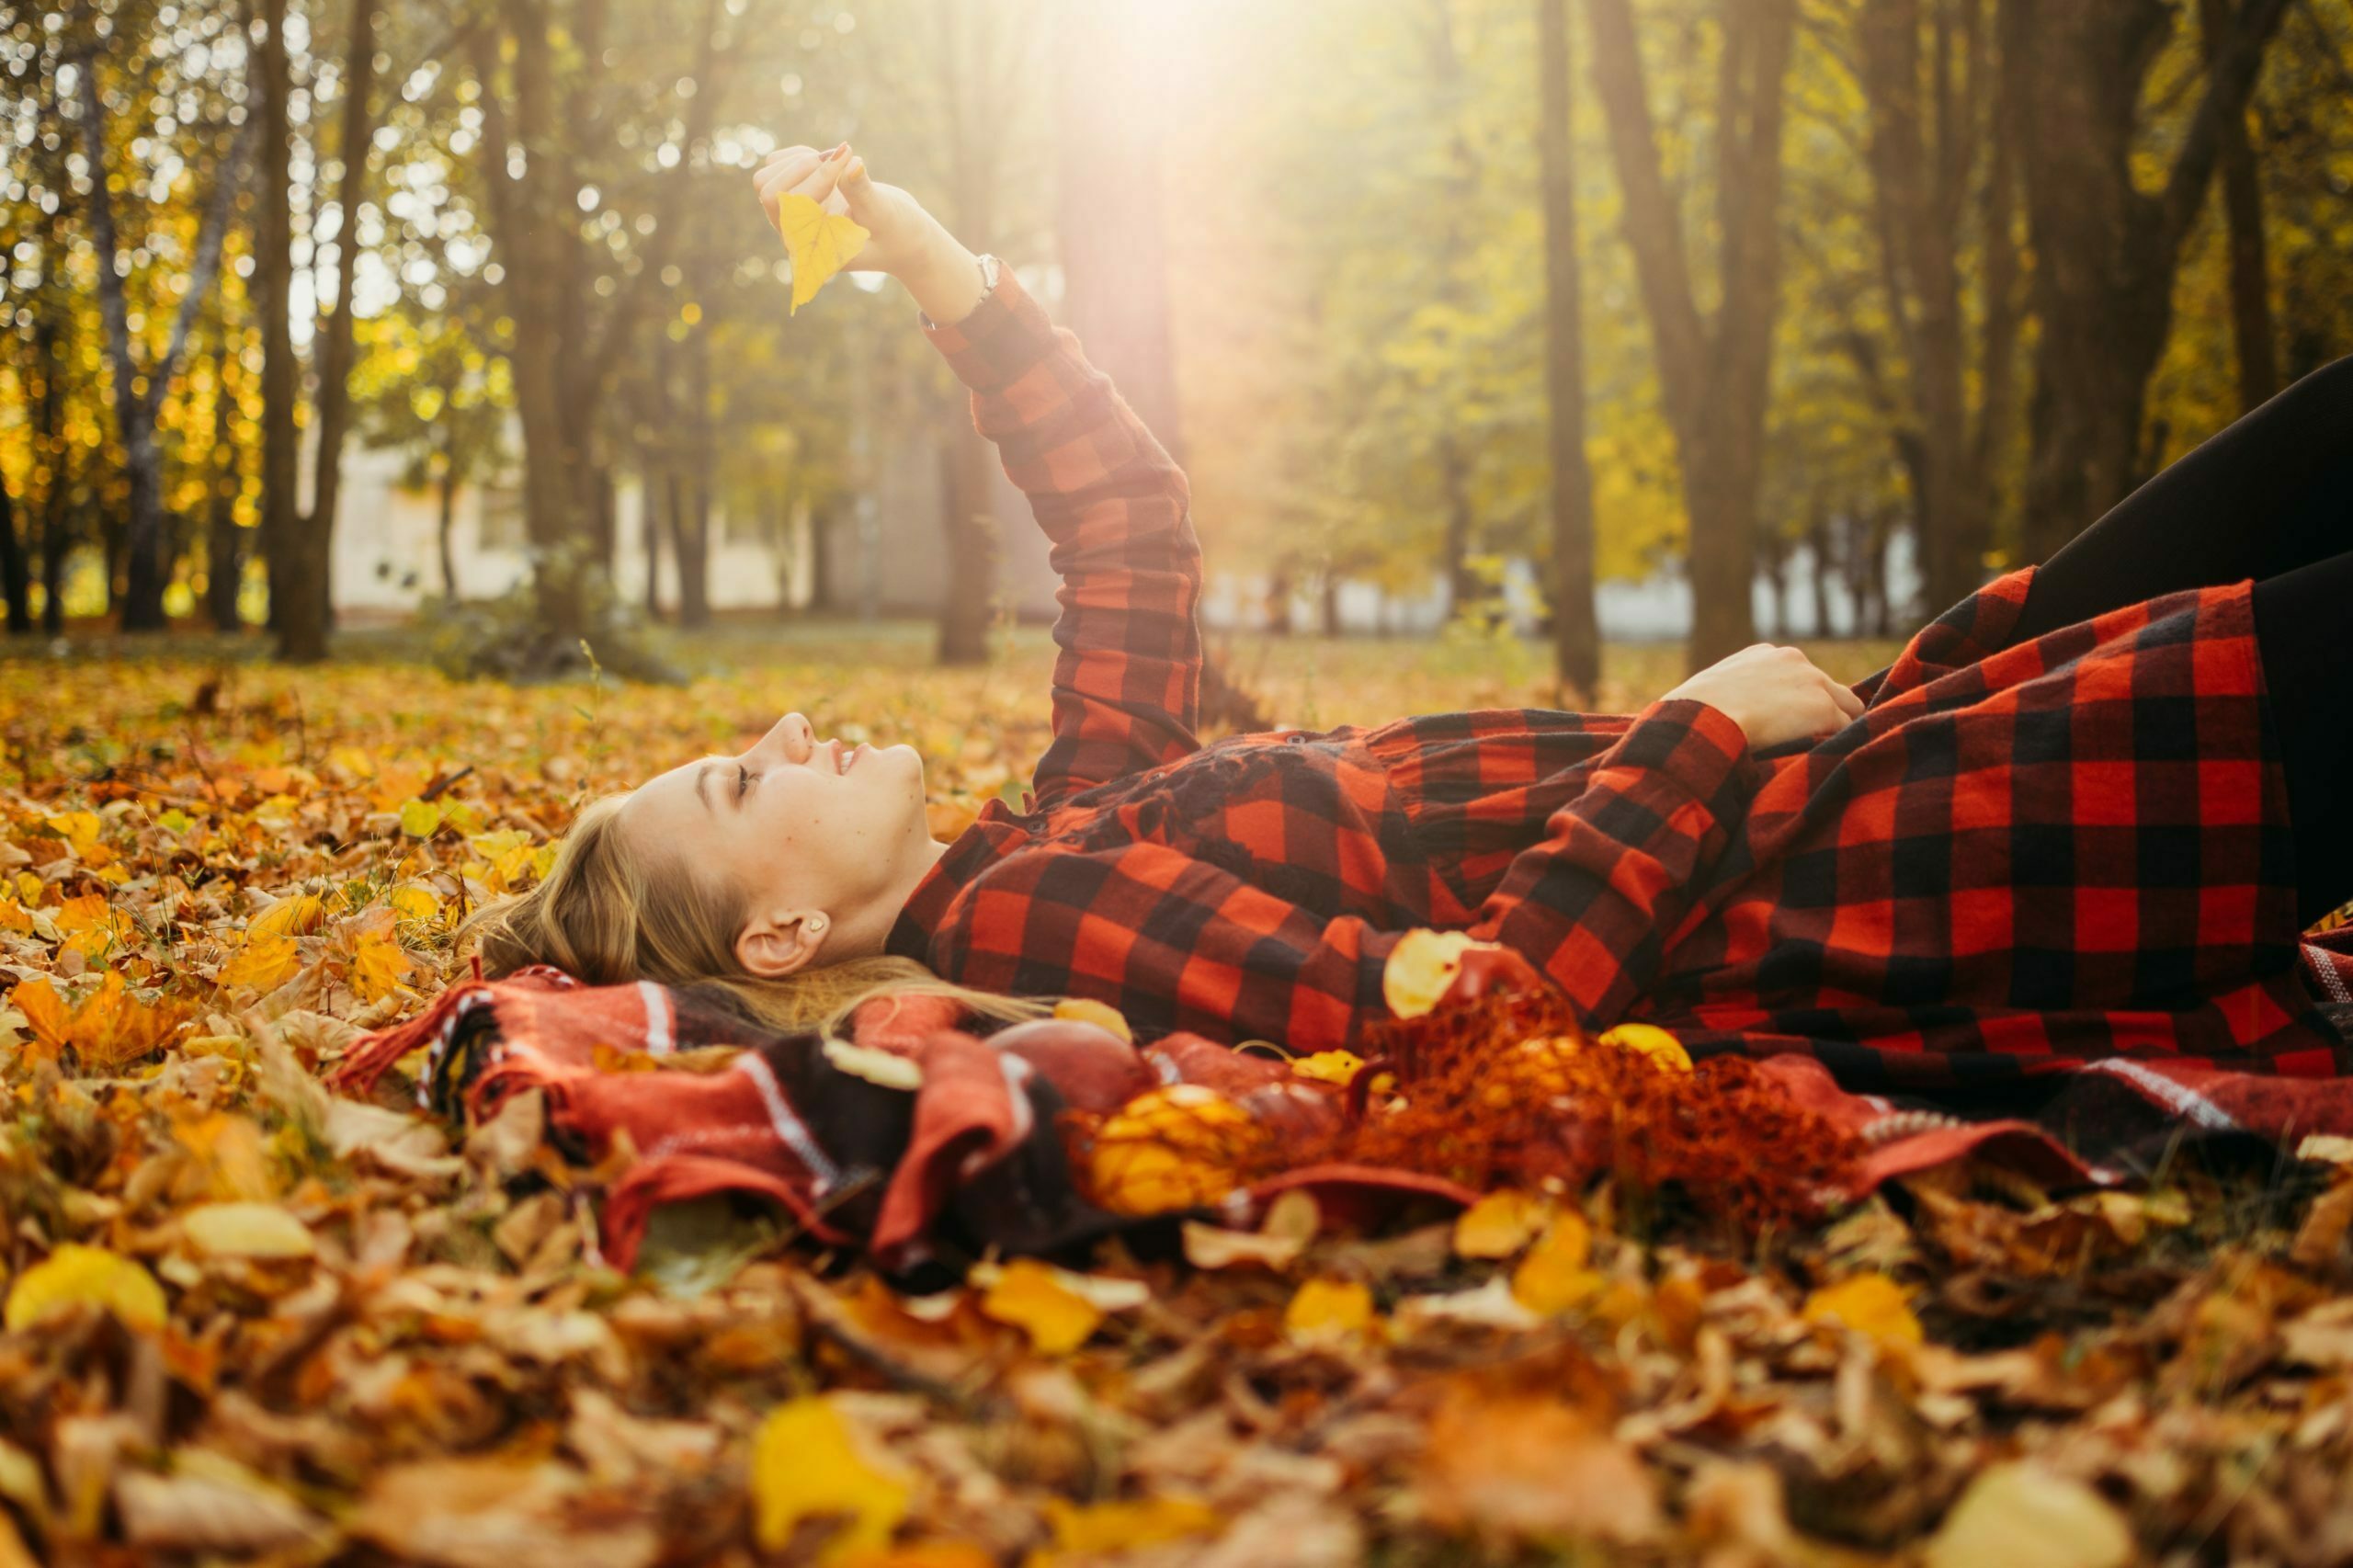 Activities for Happy Fall, Improve Yourself, Ways To Be Happy And Healthy autumn. Embrace Life